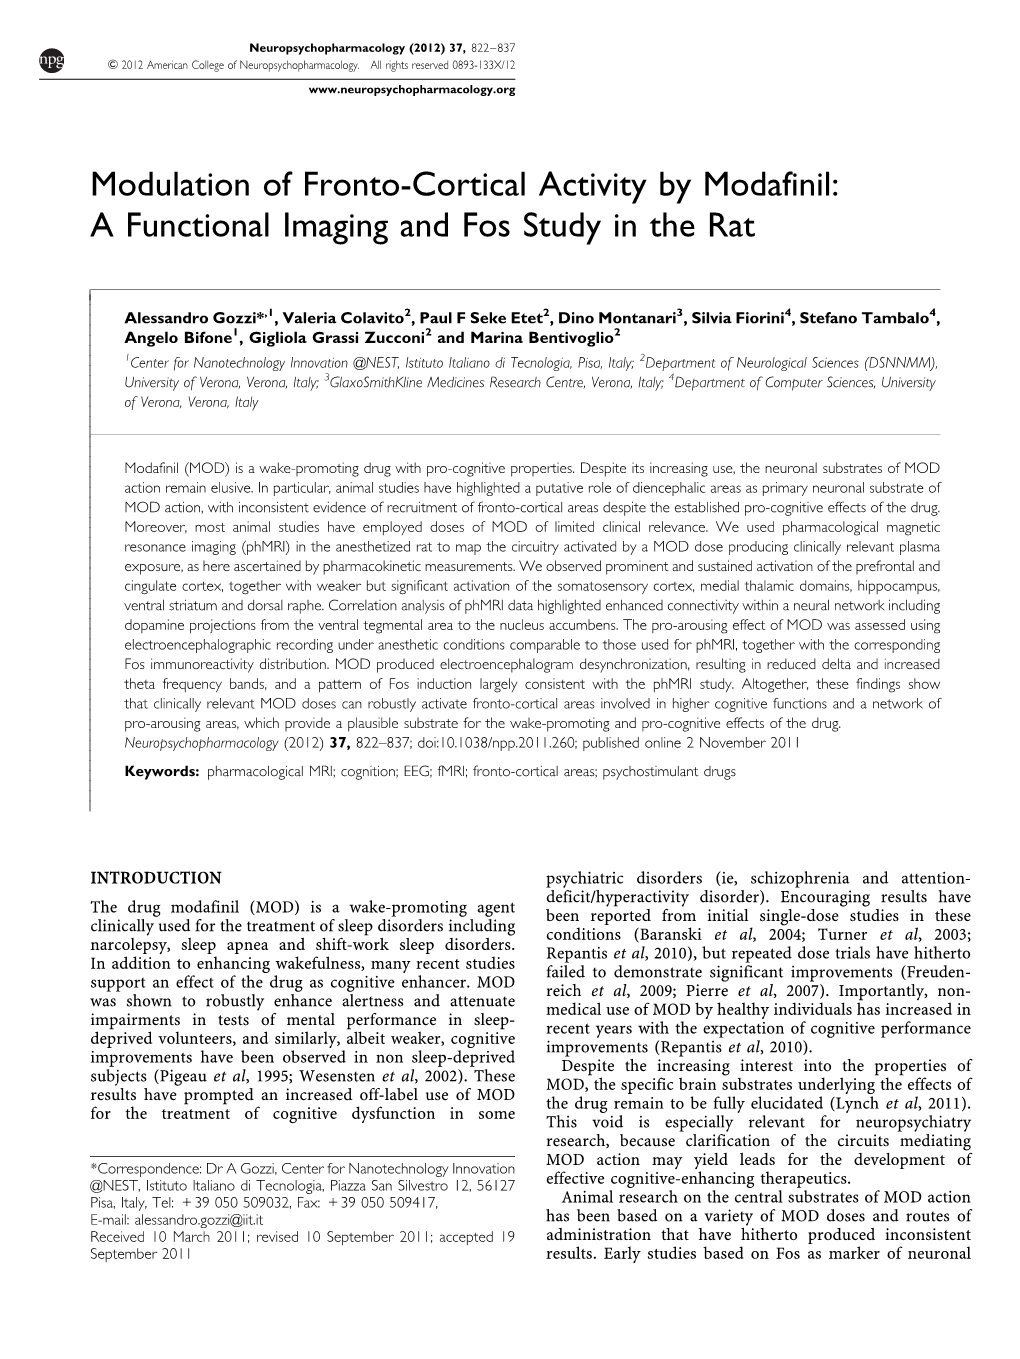 Modulation of Fronto-Cortical Activity by Modafinil: a Functional Imaging and Fos Study in the Rat